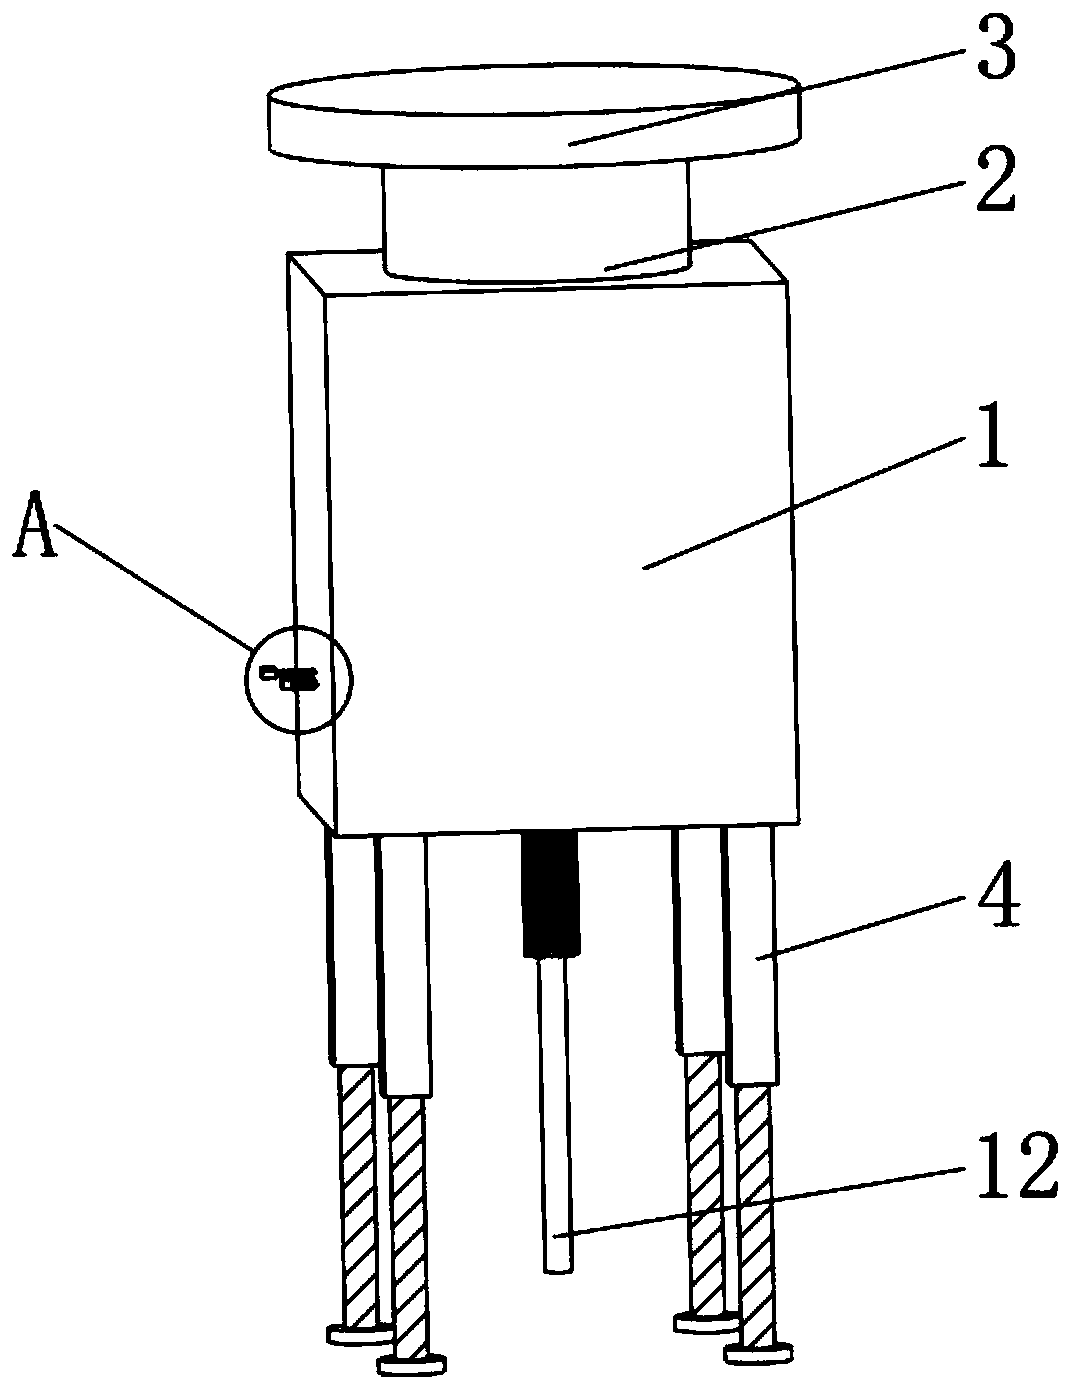 Acupuncture treatment device